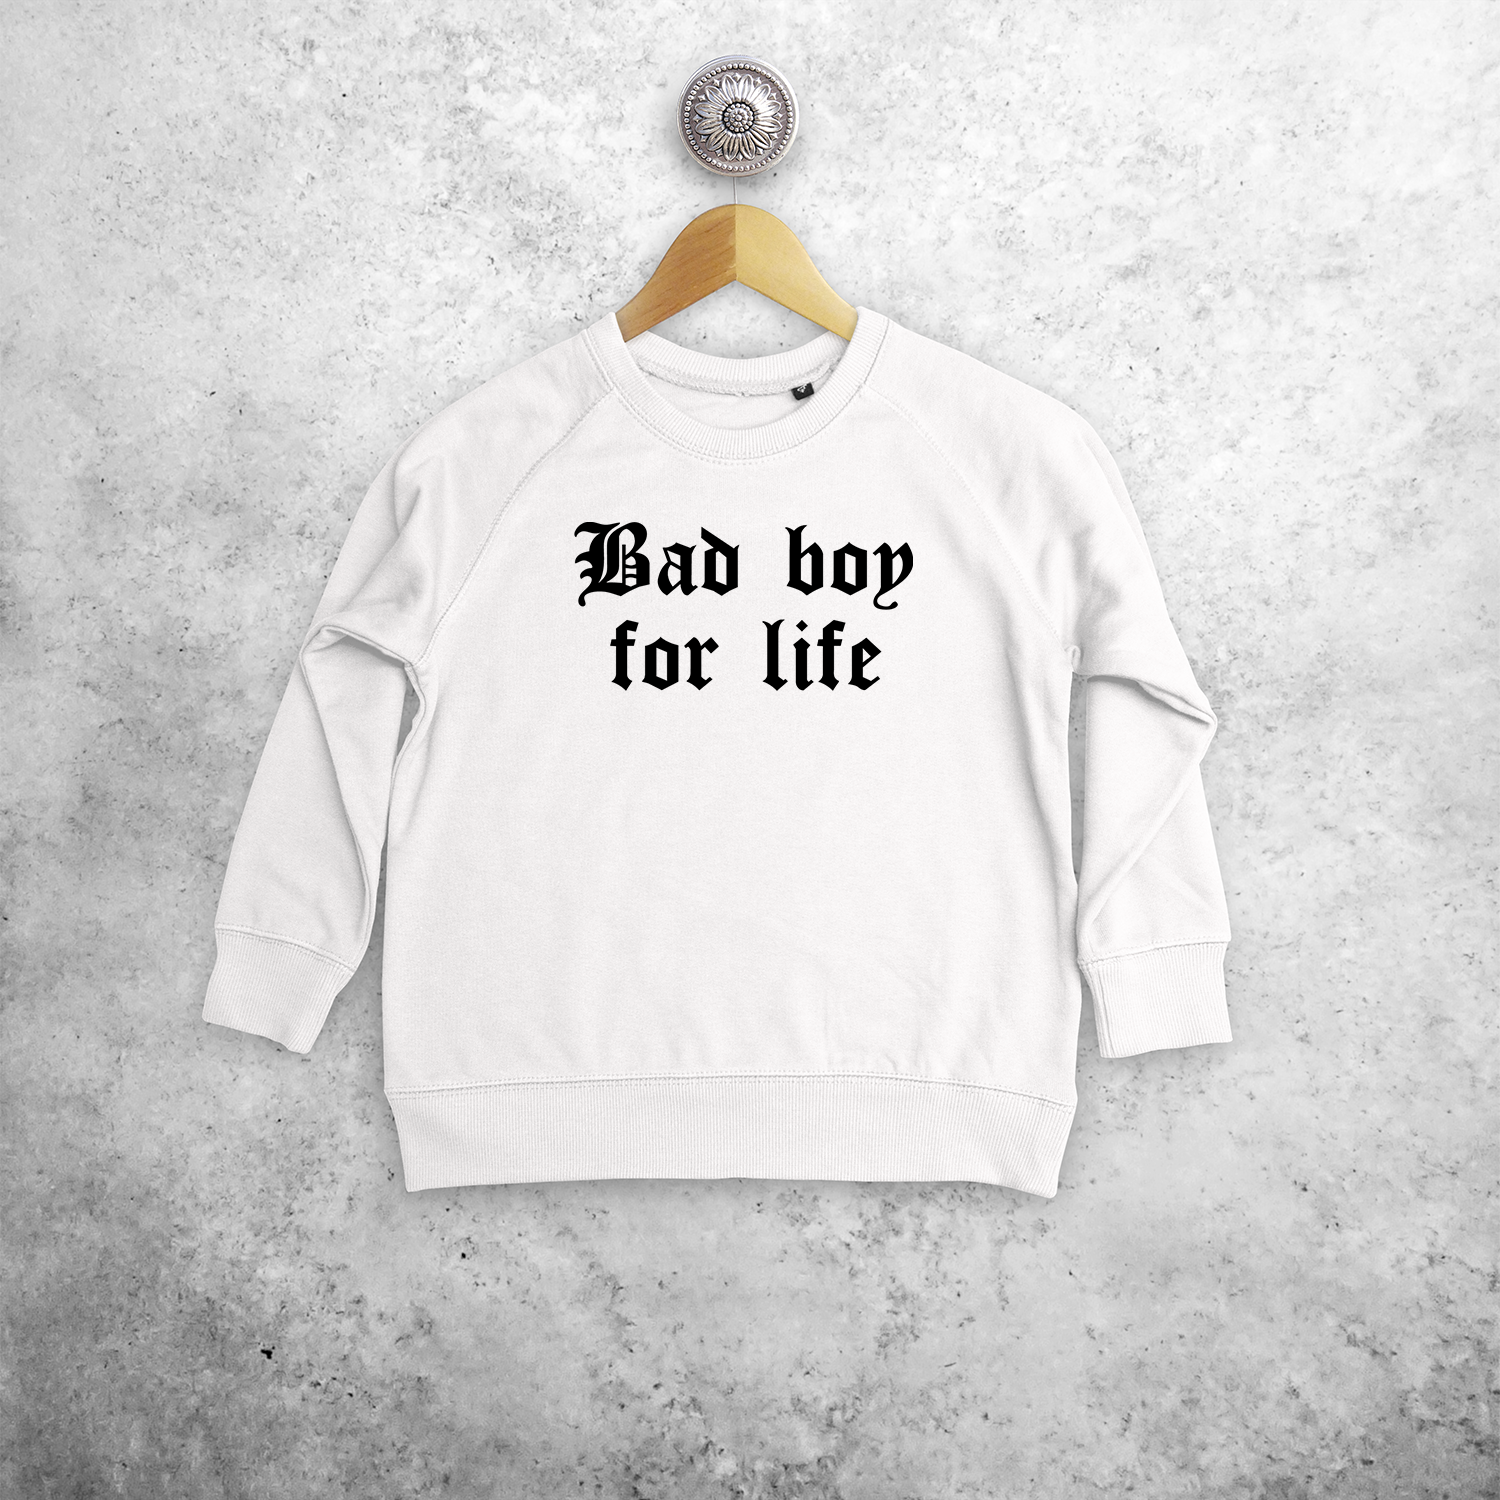 'Bad boy for life' kids sweater